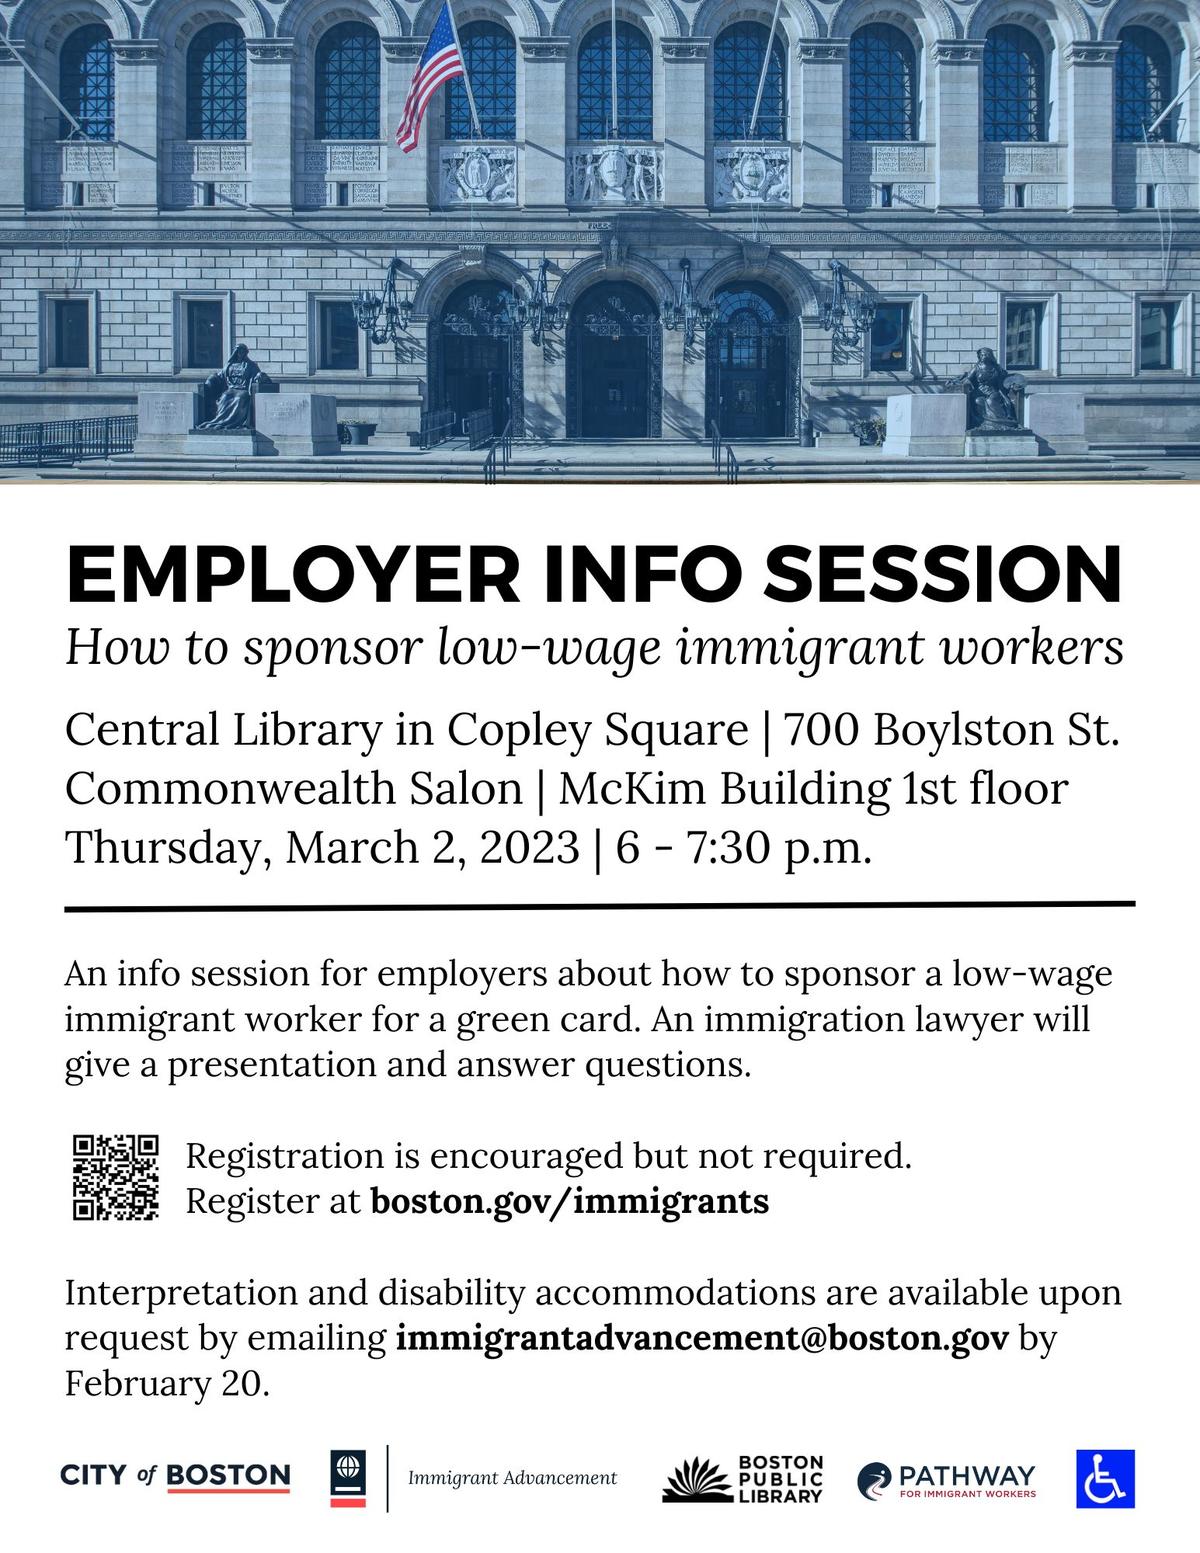 Flyer for an employer info session about how to sponsor low-wage immigrant workers. On Thursday, March 2, 2023 from 6-7:30pm